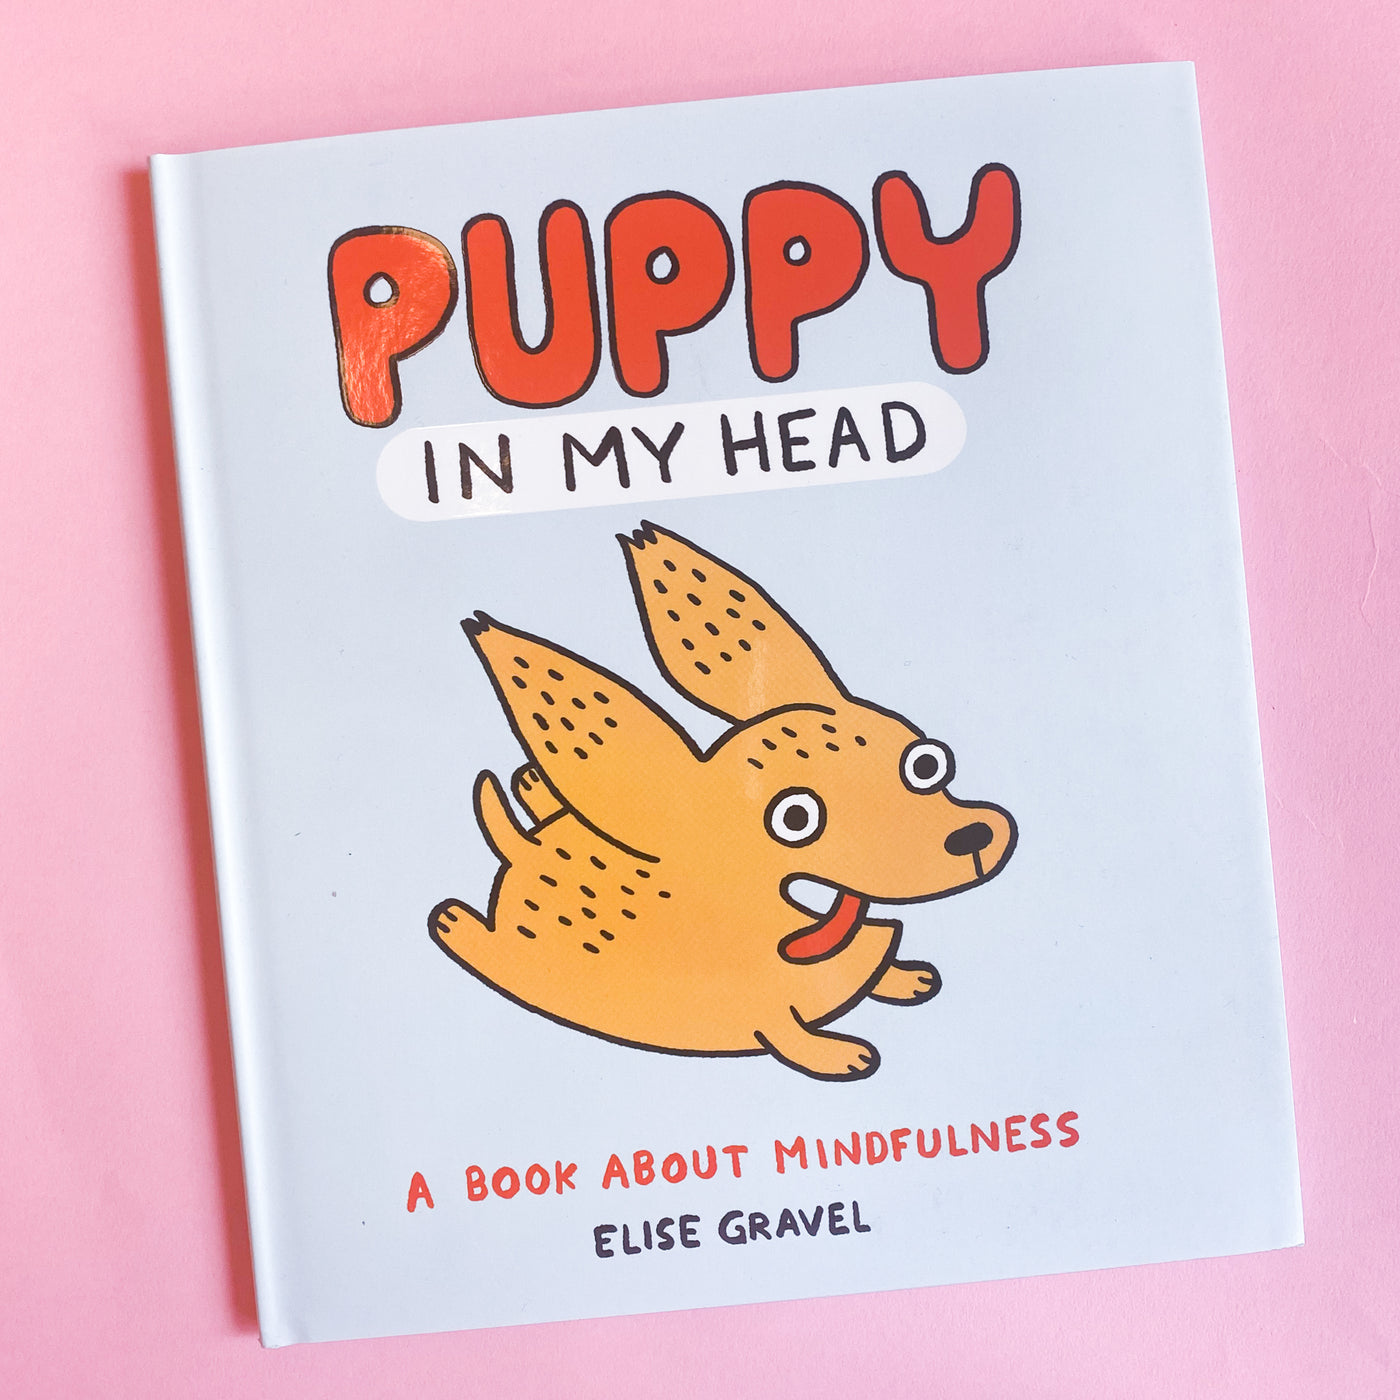 Puppy in My Head: A Book About Mindfulness by Elise Gravel